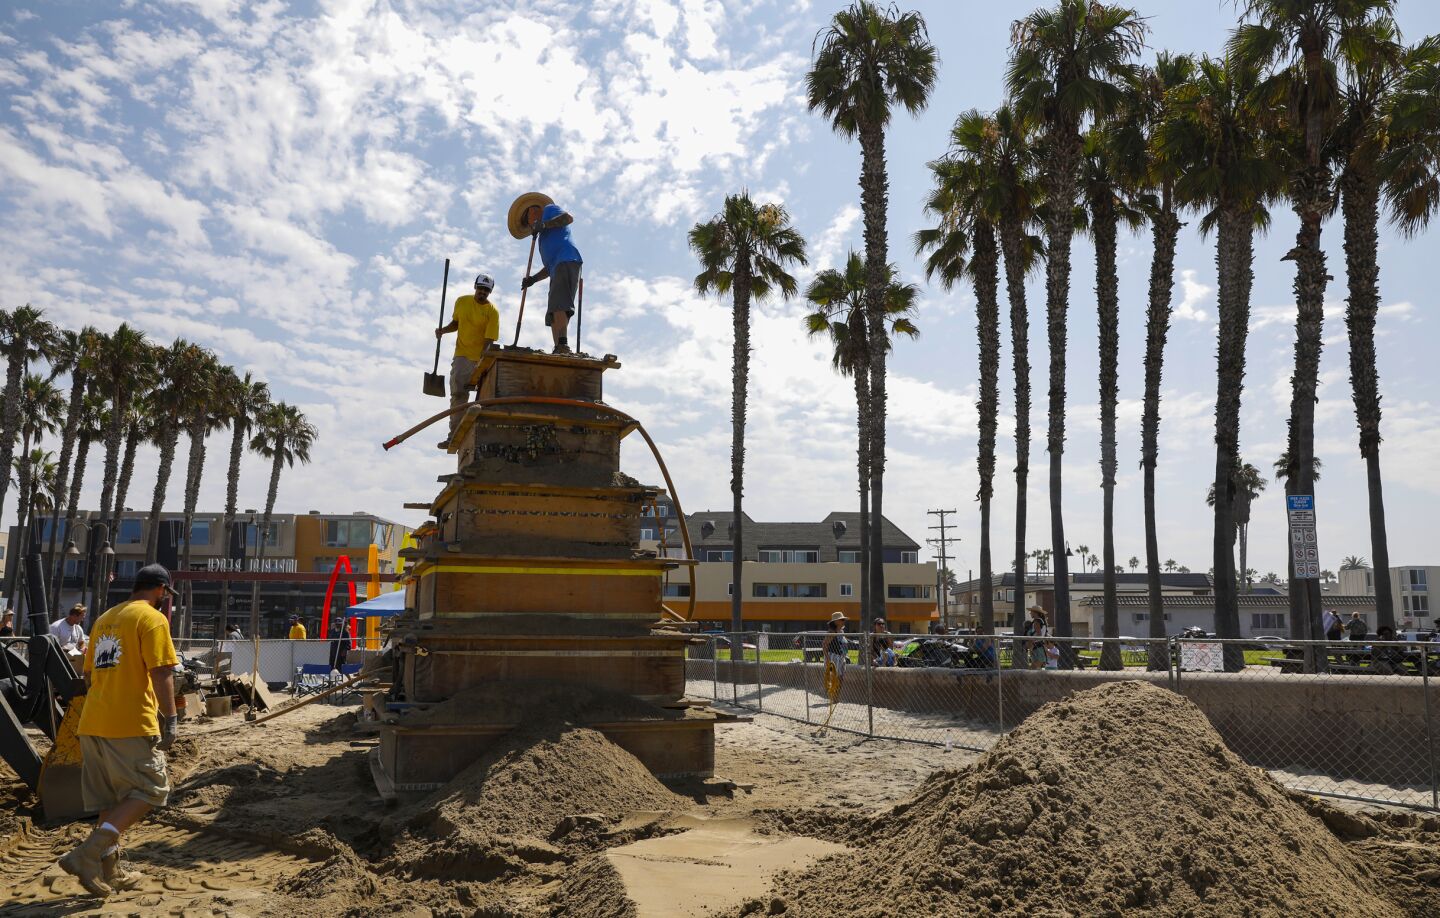 824931-sd-fi-sand-castle_NL August 14, 2021 San Diego, CA Imperial Beach's Sun & Sea Festival, an annual sandcastle event, is once again scaled down due to COVID. Today the festival highlighted that San Diego County's largest sandcastle competition was replaced by an effort to build the largest sandcastle ever on Imperial Beach sand. This massive sandcastle will be built at Portwood Pier Plaza by the multi-award-winning professional team and hometown favorite, I.B. Posse. Here, Leonard Gonzales, Jr. (left) and Bruce Phillips work atop of one of two structures which they are hoping to finish by Wednesday. © 2021 Nancee Lewis / Nancee Lewis Photography